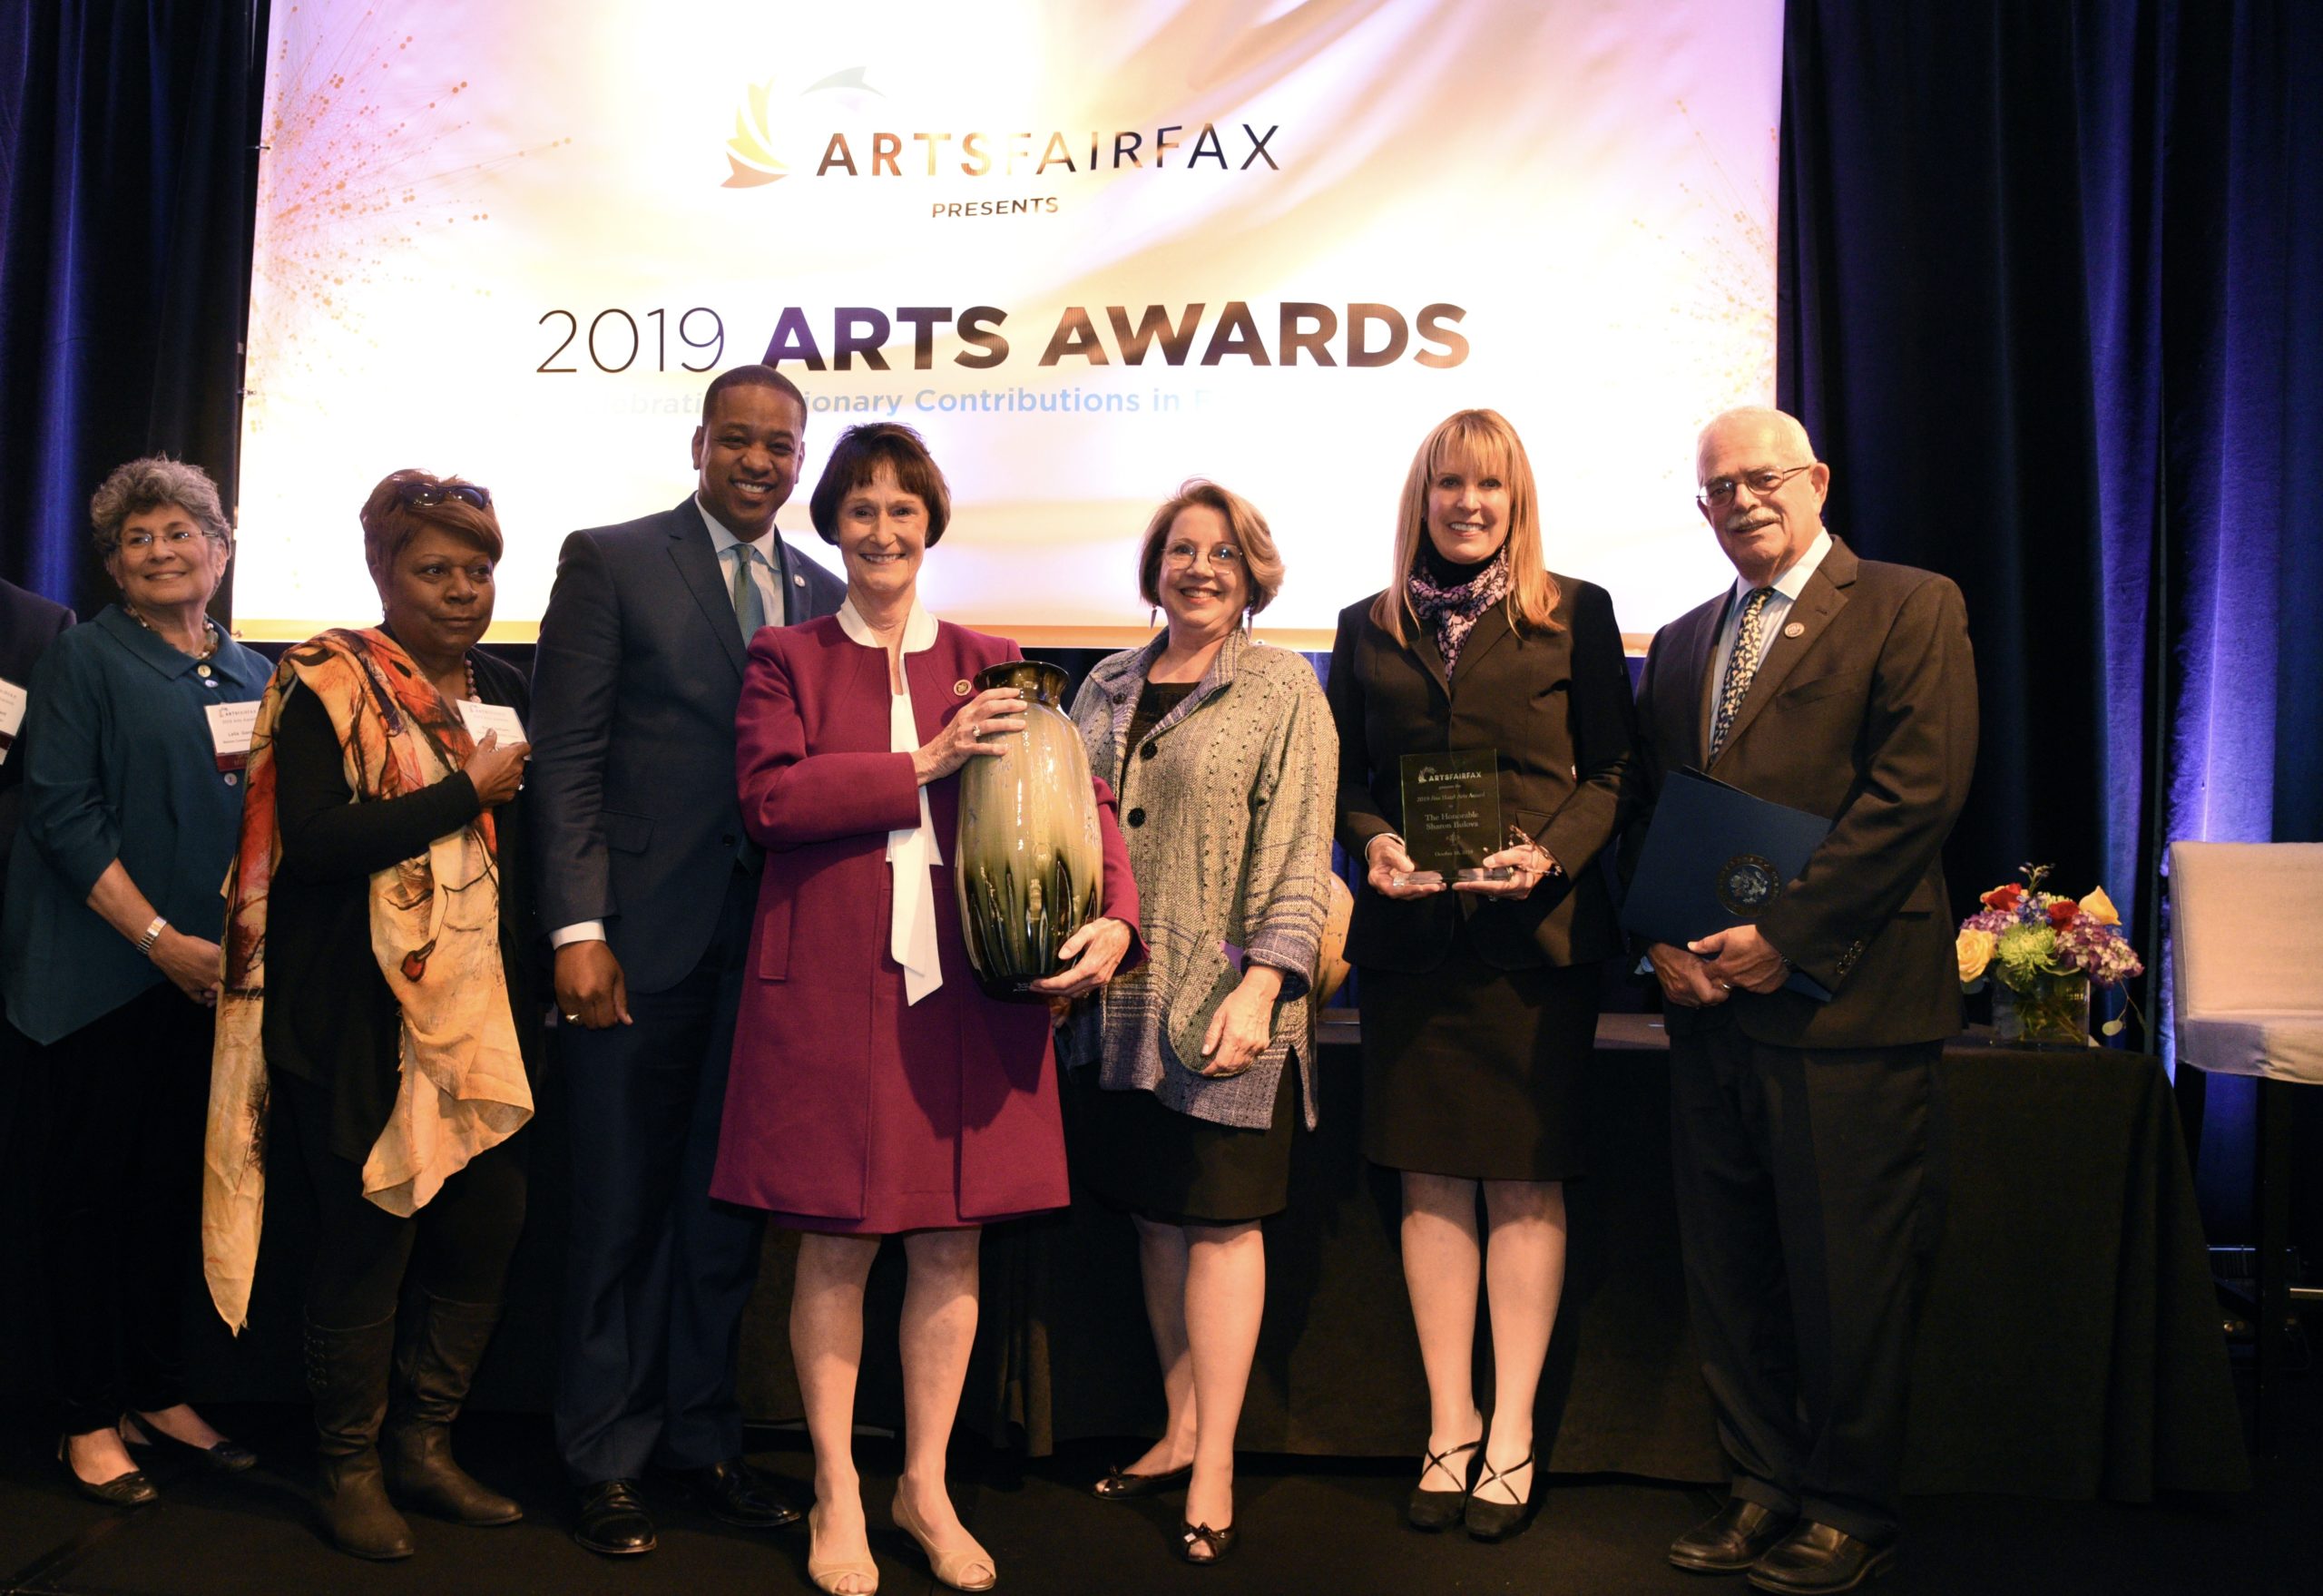 Arts Council of Fairfax County Awards Ten Project Support Grants Totaling $96,900